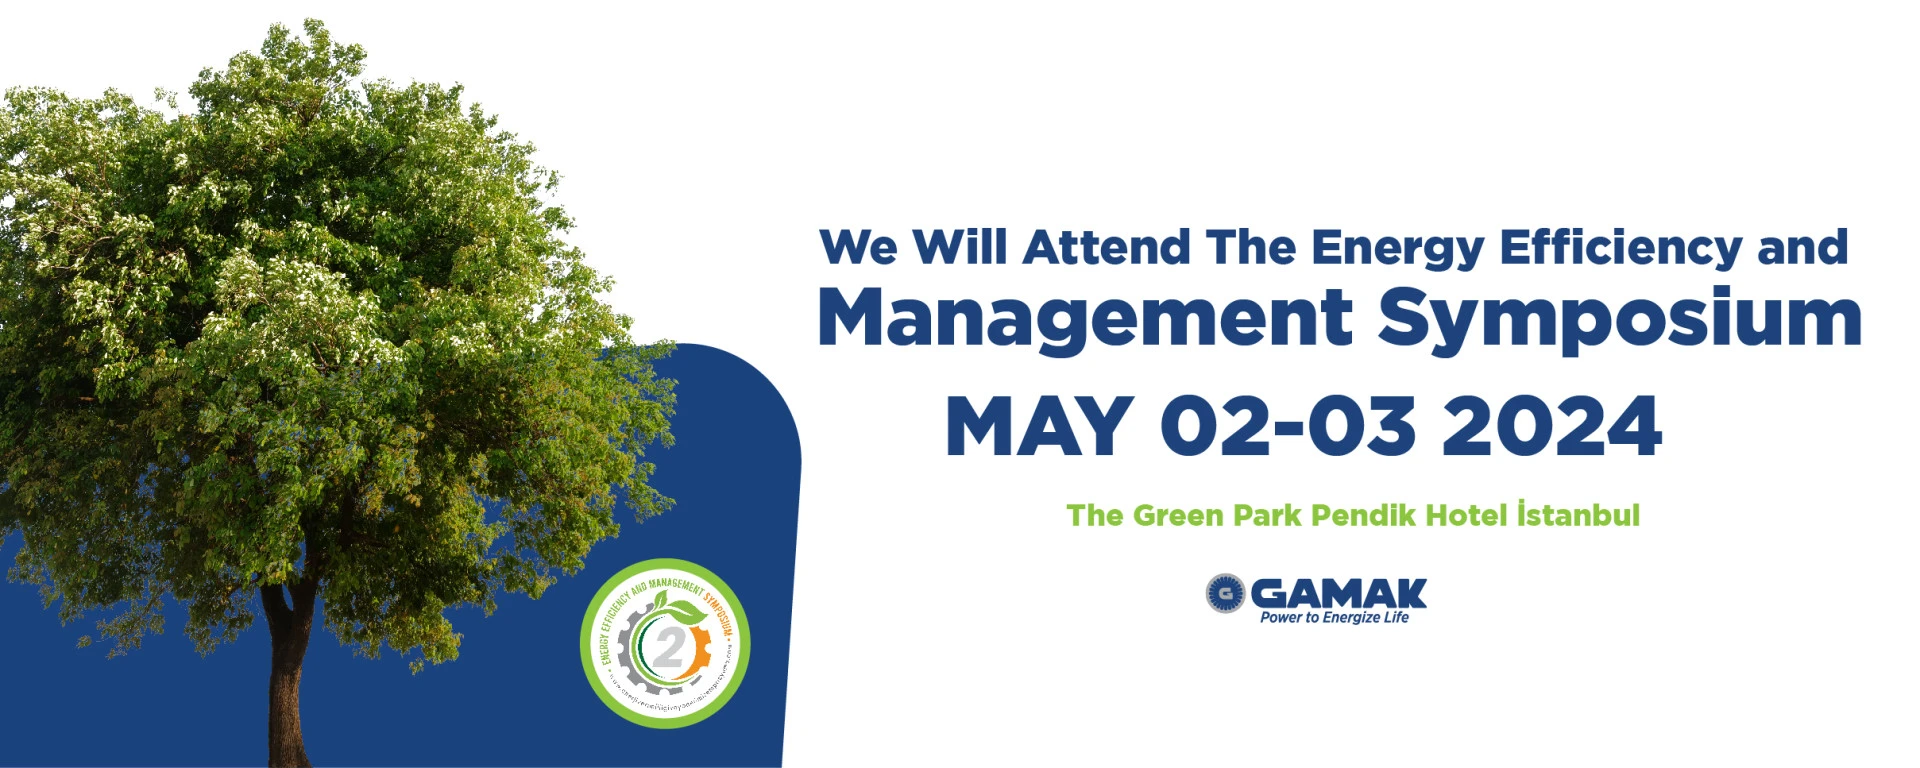 We Will Attend The Energy Efficiency and Management Symposium!